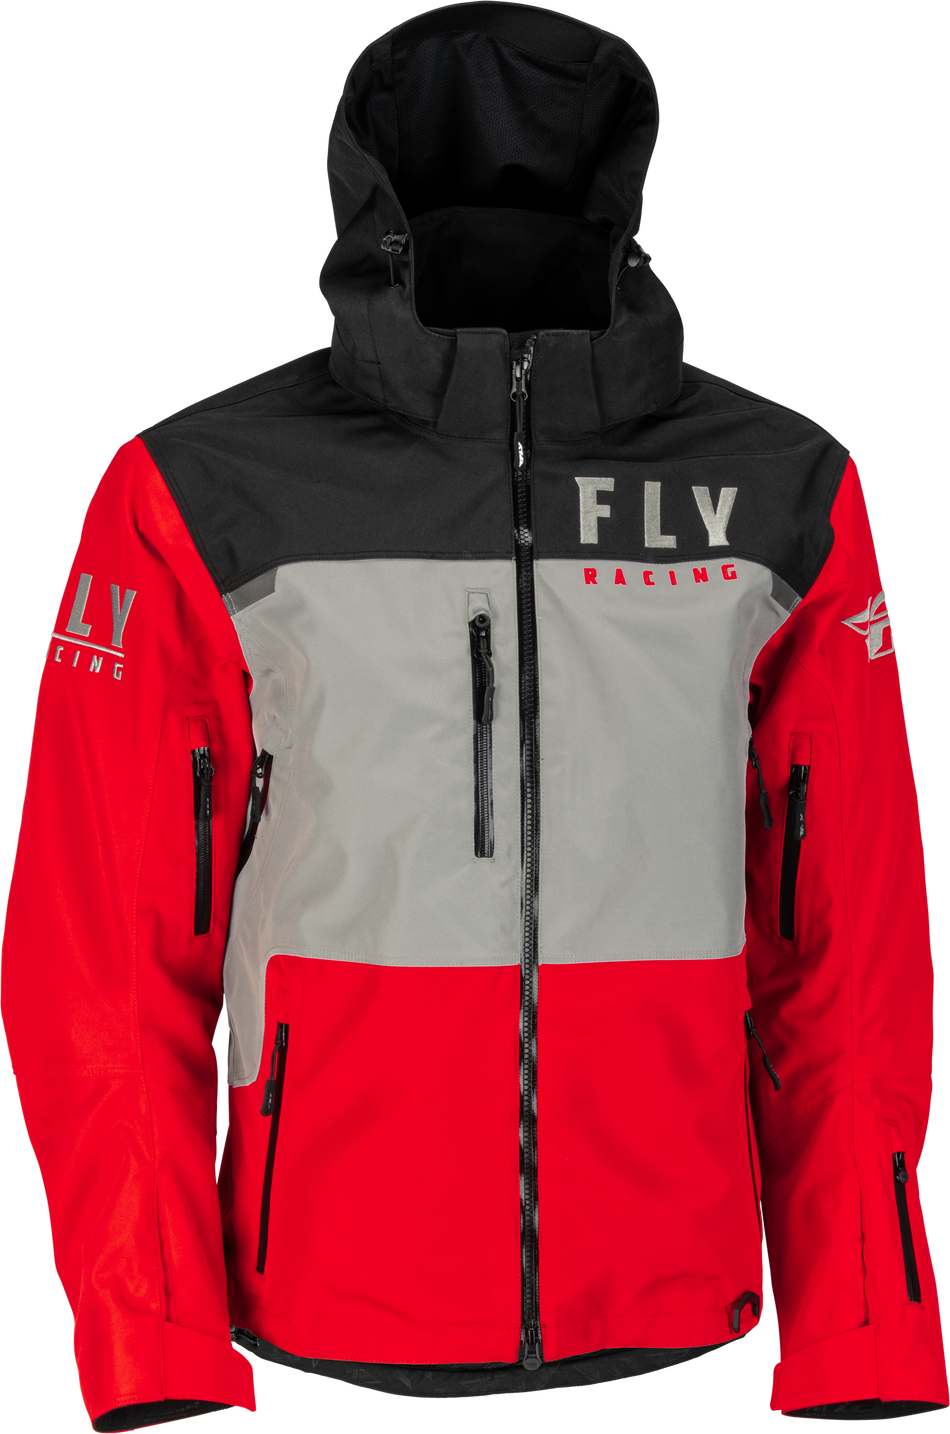 FLY RACING Carbon Jacket Red/Grey Lg 470-4134L